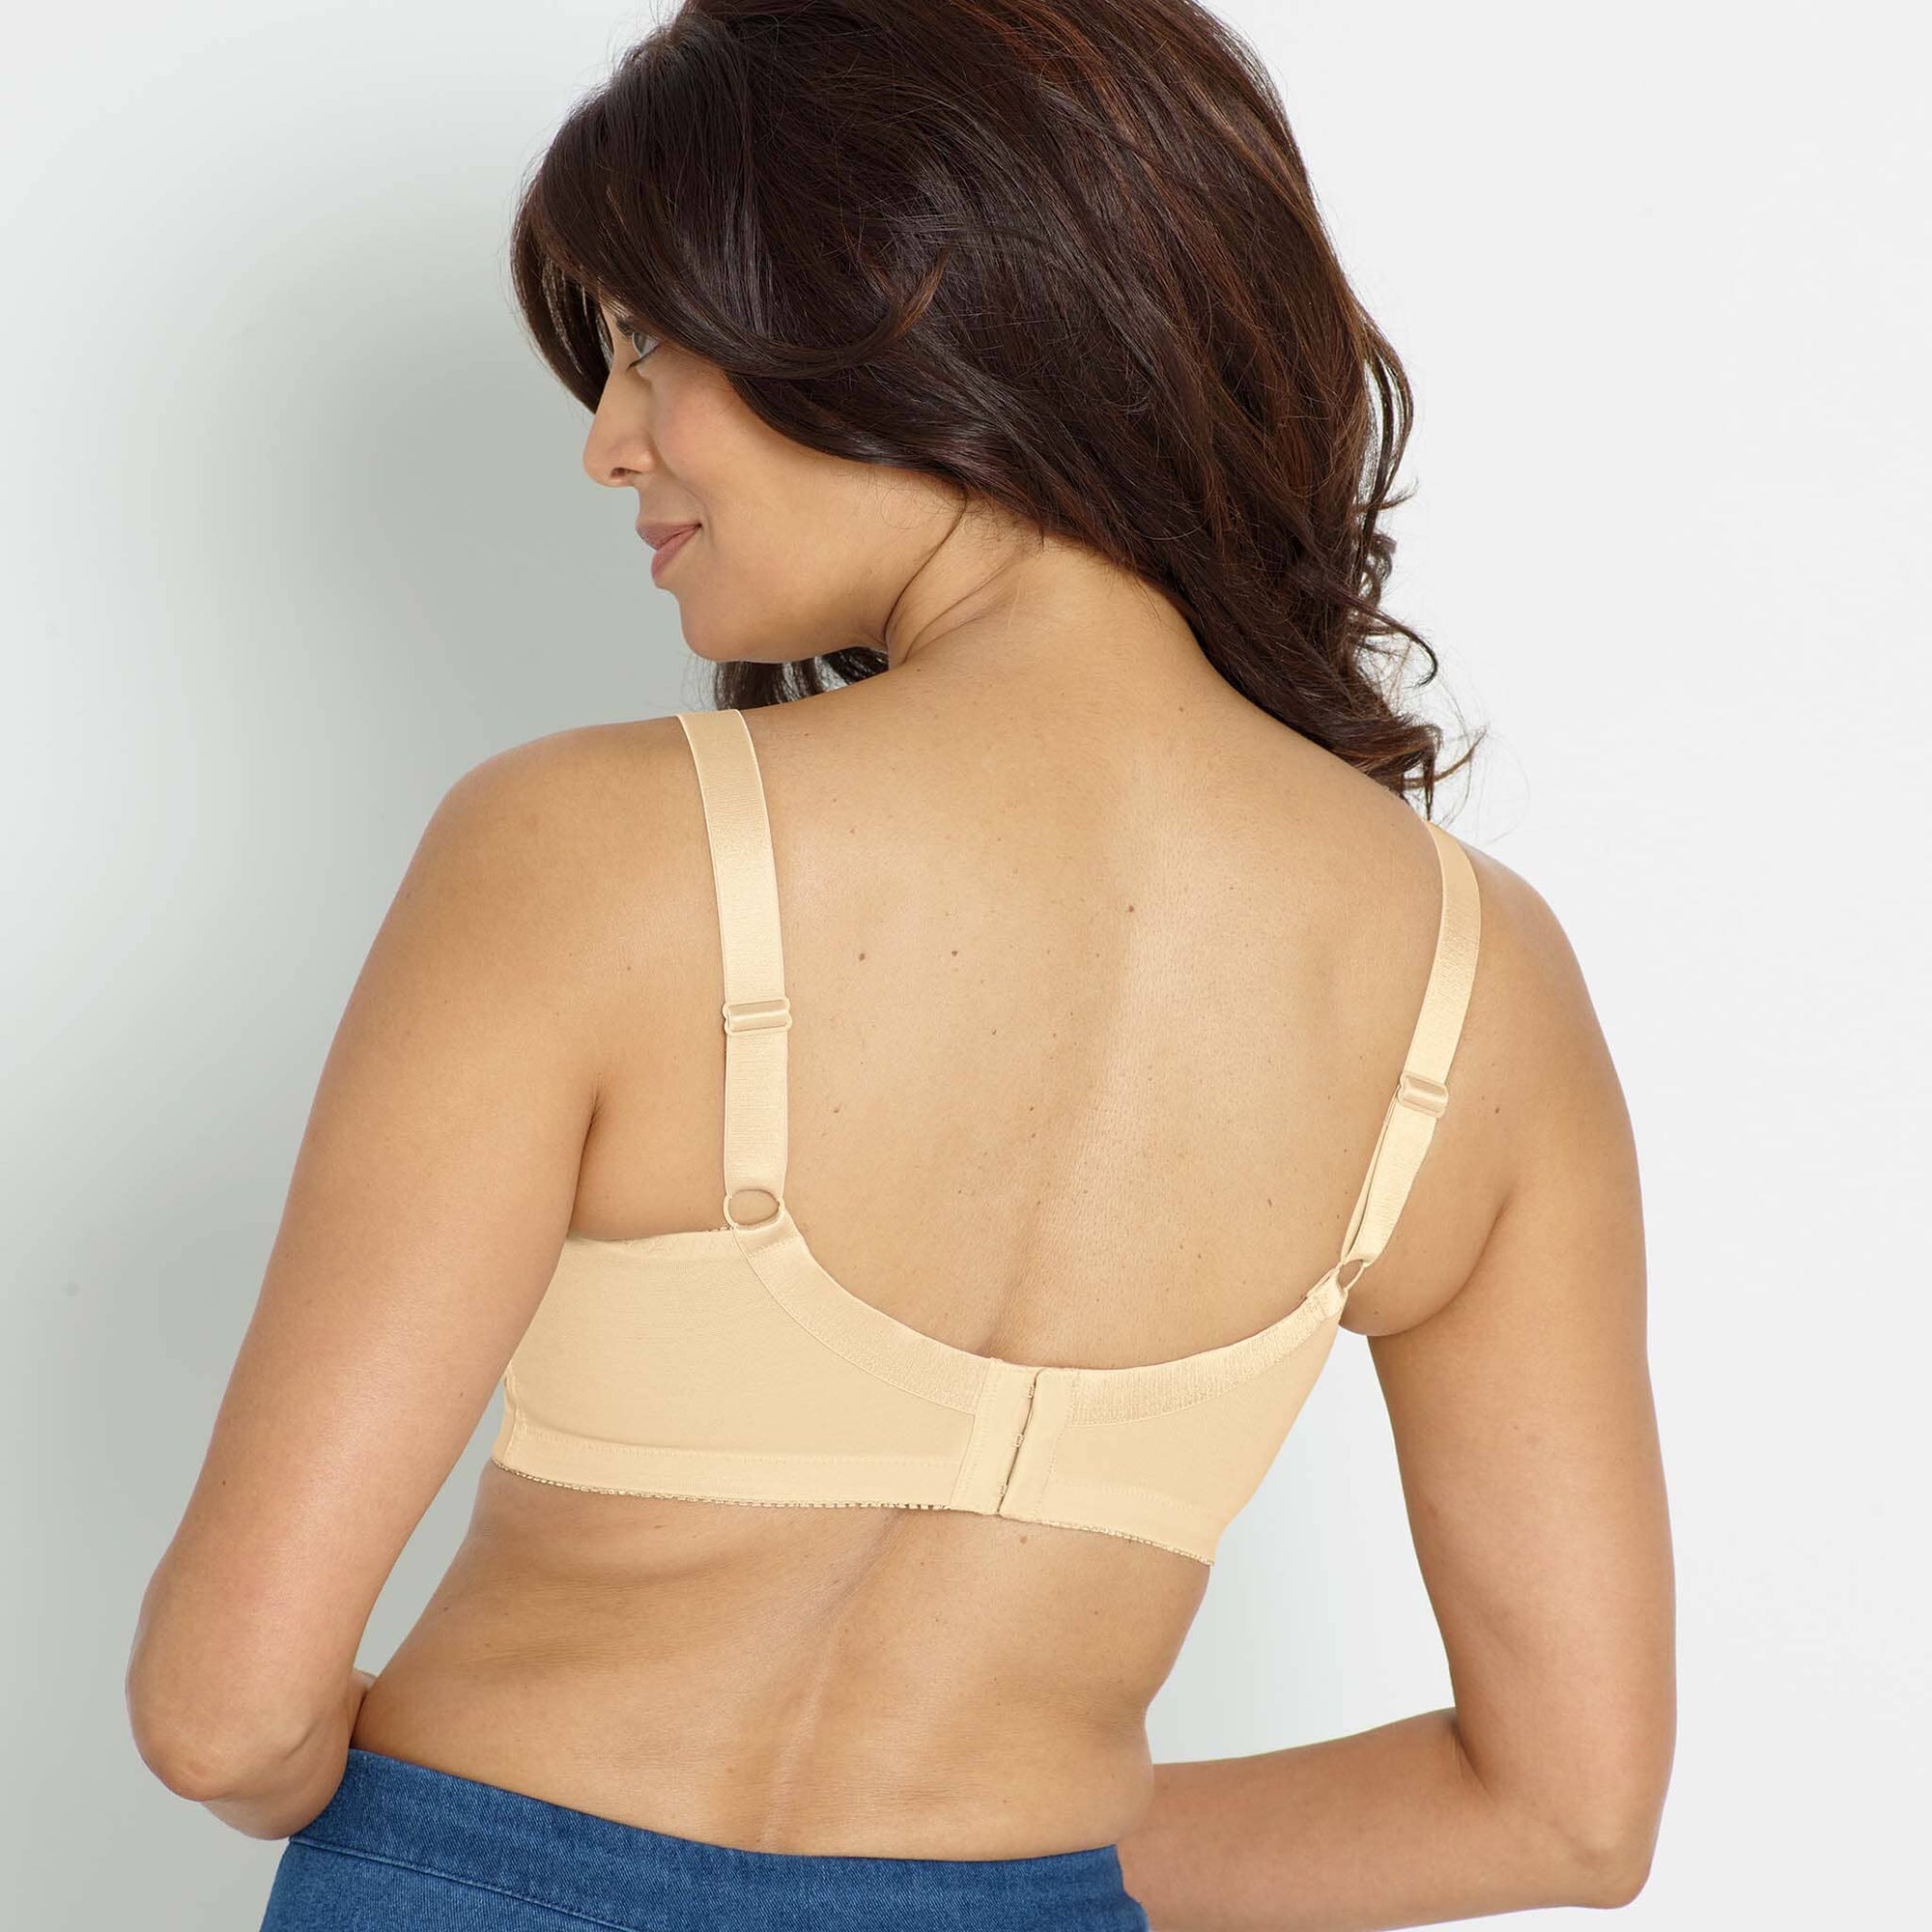 Back view #7837 Contoured Soft Cup Mastectomy Bra shown in beige.